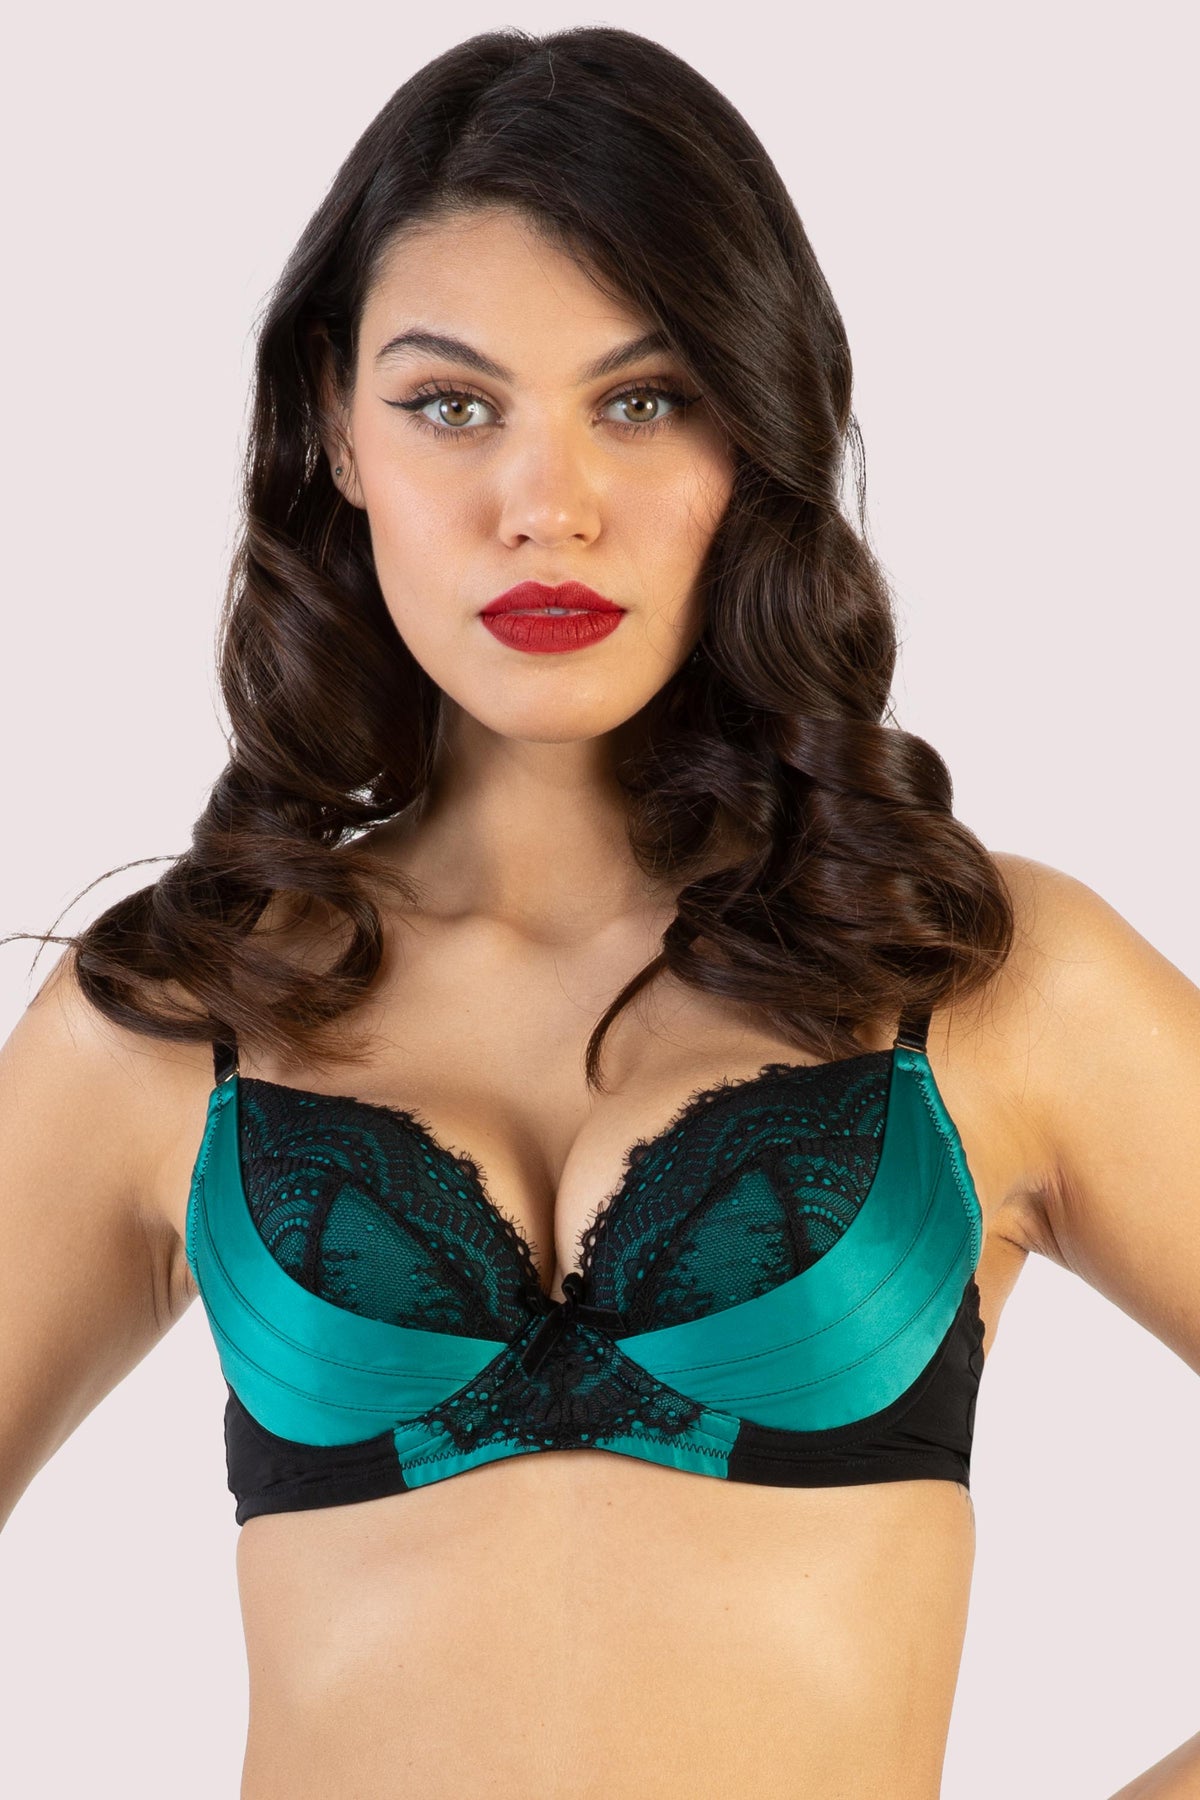 Playful Promises Bettie Page Melda Satin And Lace Girdle in Blue